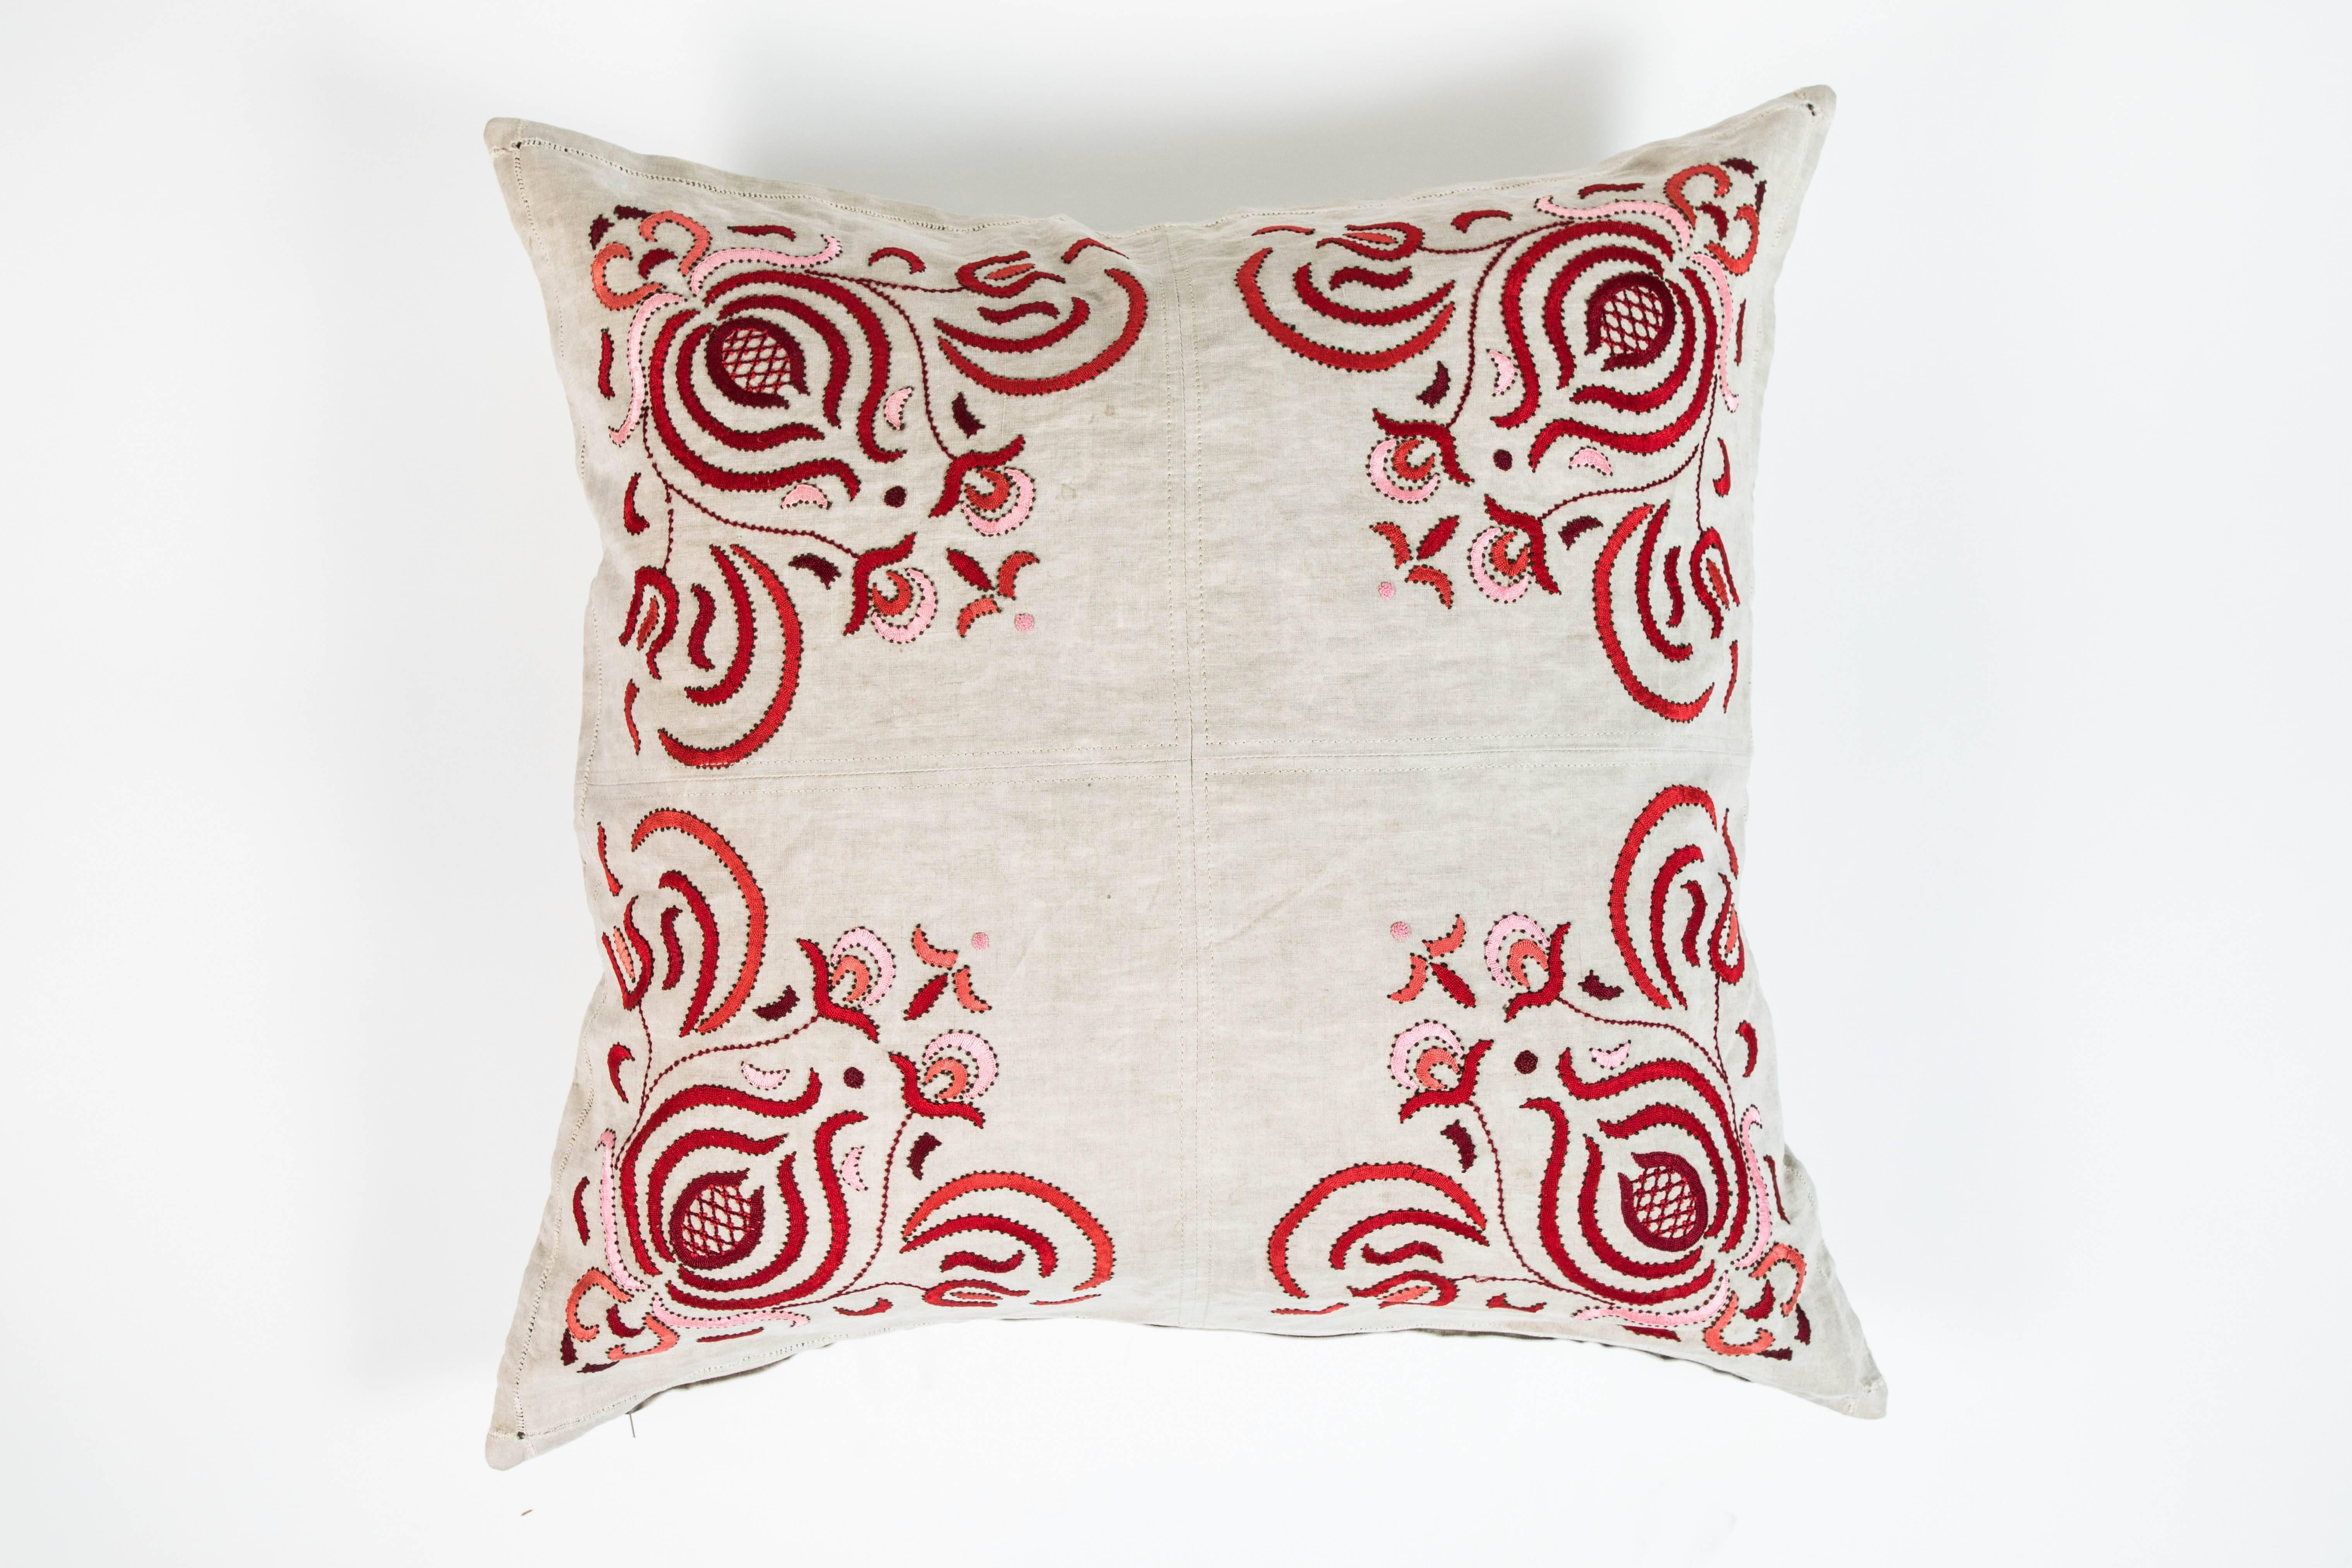 Custom pillow made from the four corners of a linen table cloth with red/pink embroidery and down insert. Measure: 26 x 26.